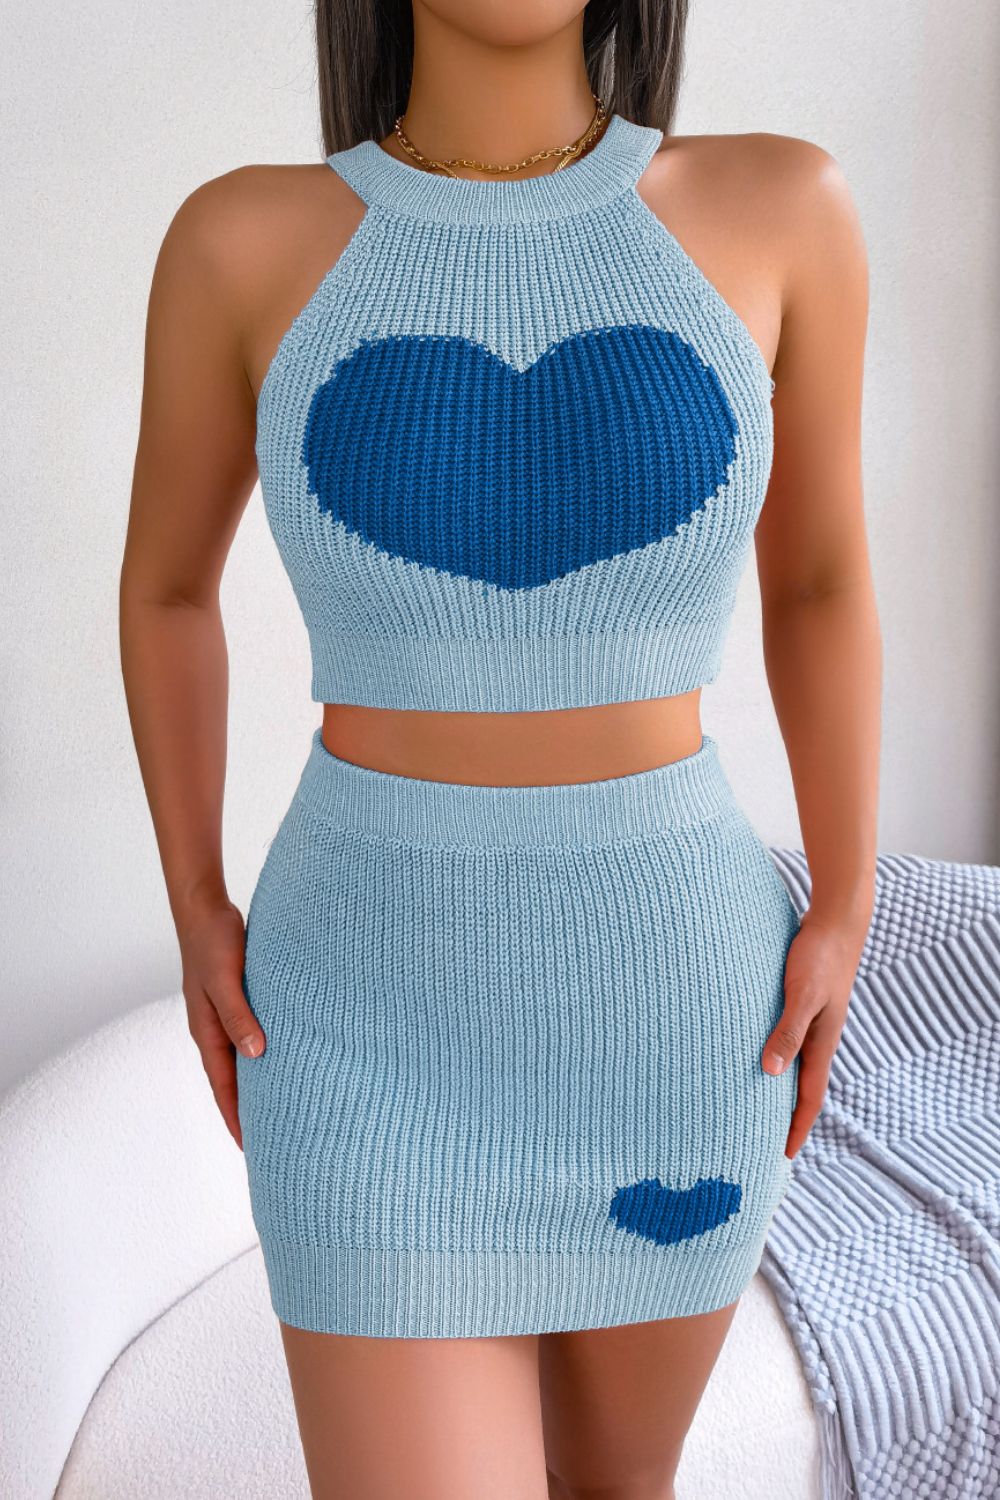 Heart Contrast Ribbed Sleeveless Knit Top and Skirt Set - Sky Blue / S Girl Code